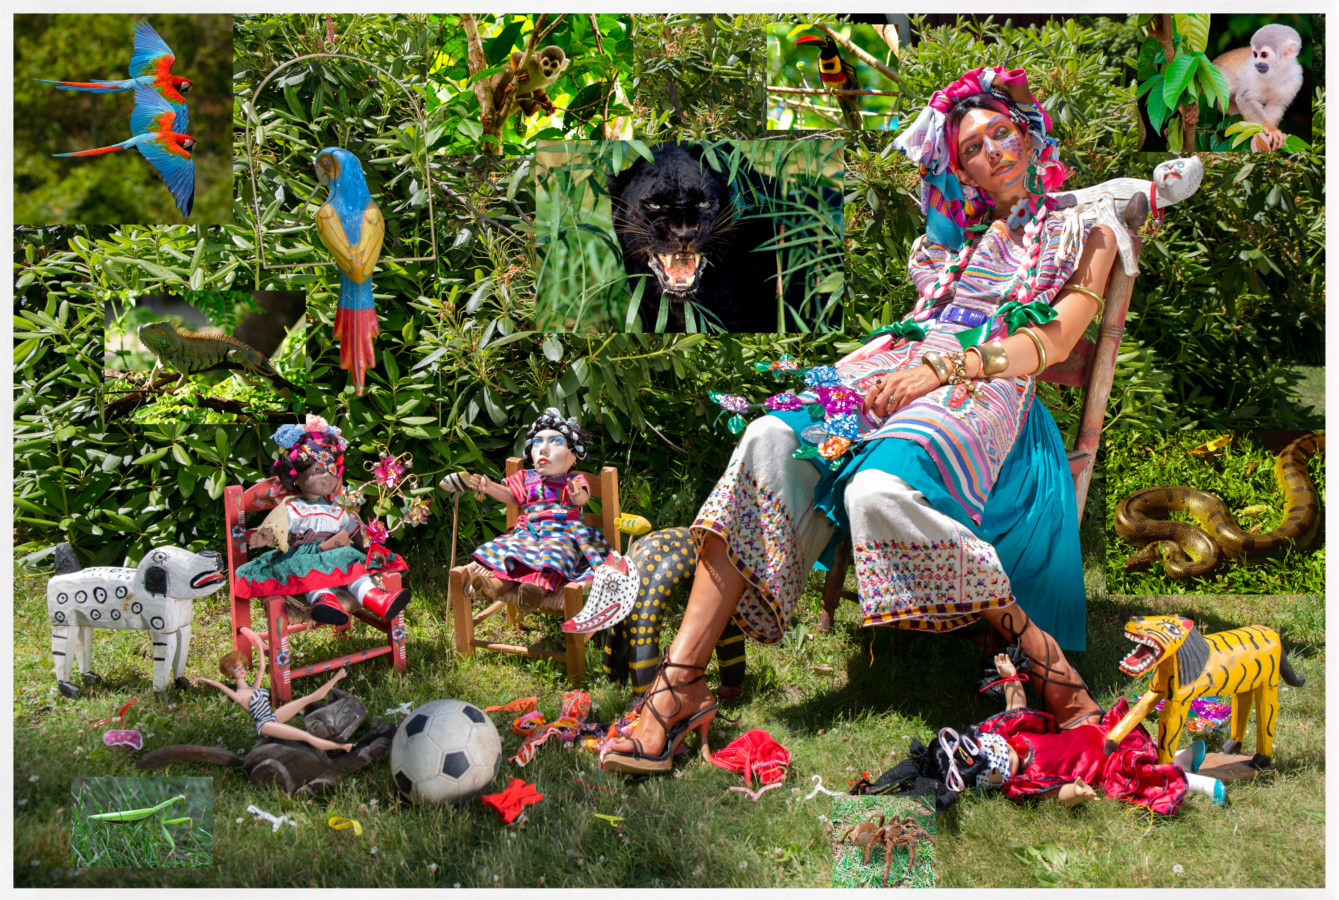 Framed color photograph of a woman seated in a garden surrounded by collaged images of jungle animals and toys